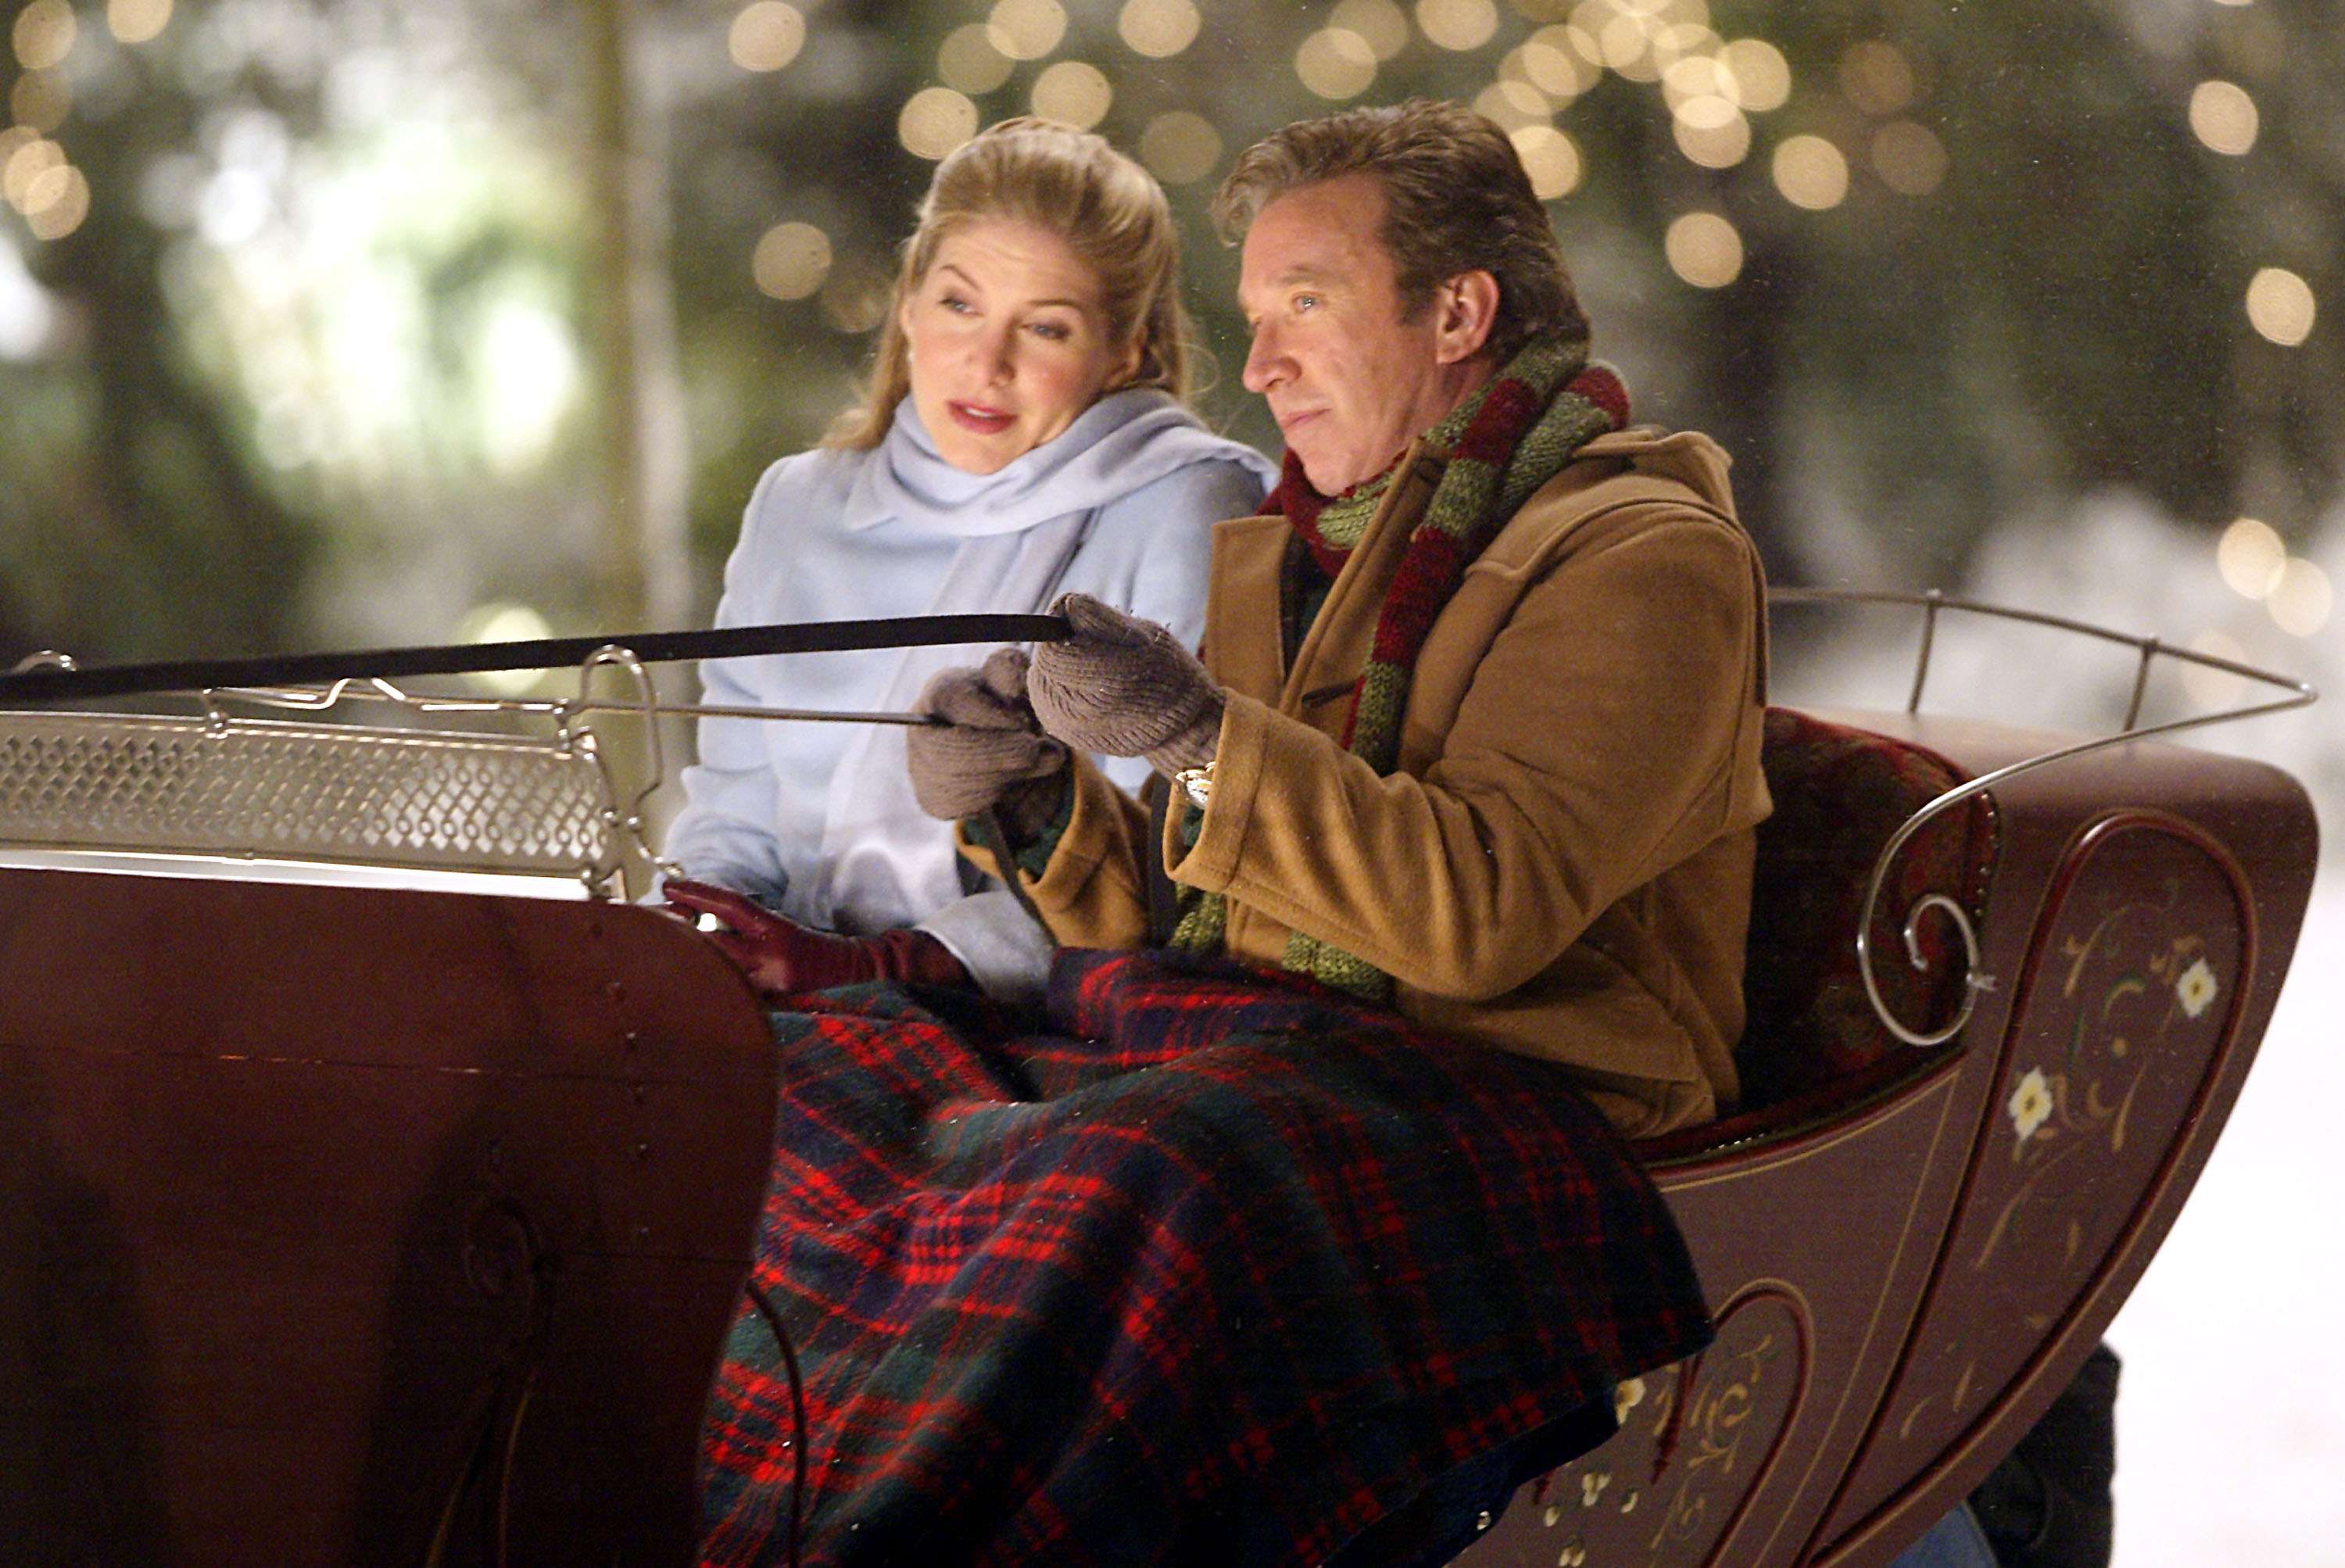 Actors Elizabeth Mitchell and Tim Allen act in a scene on the set of their film, 'The Santa Clause 2' 